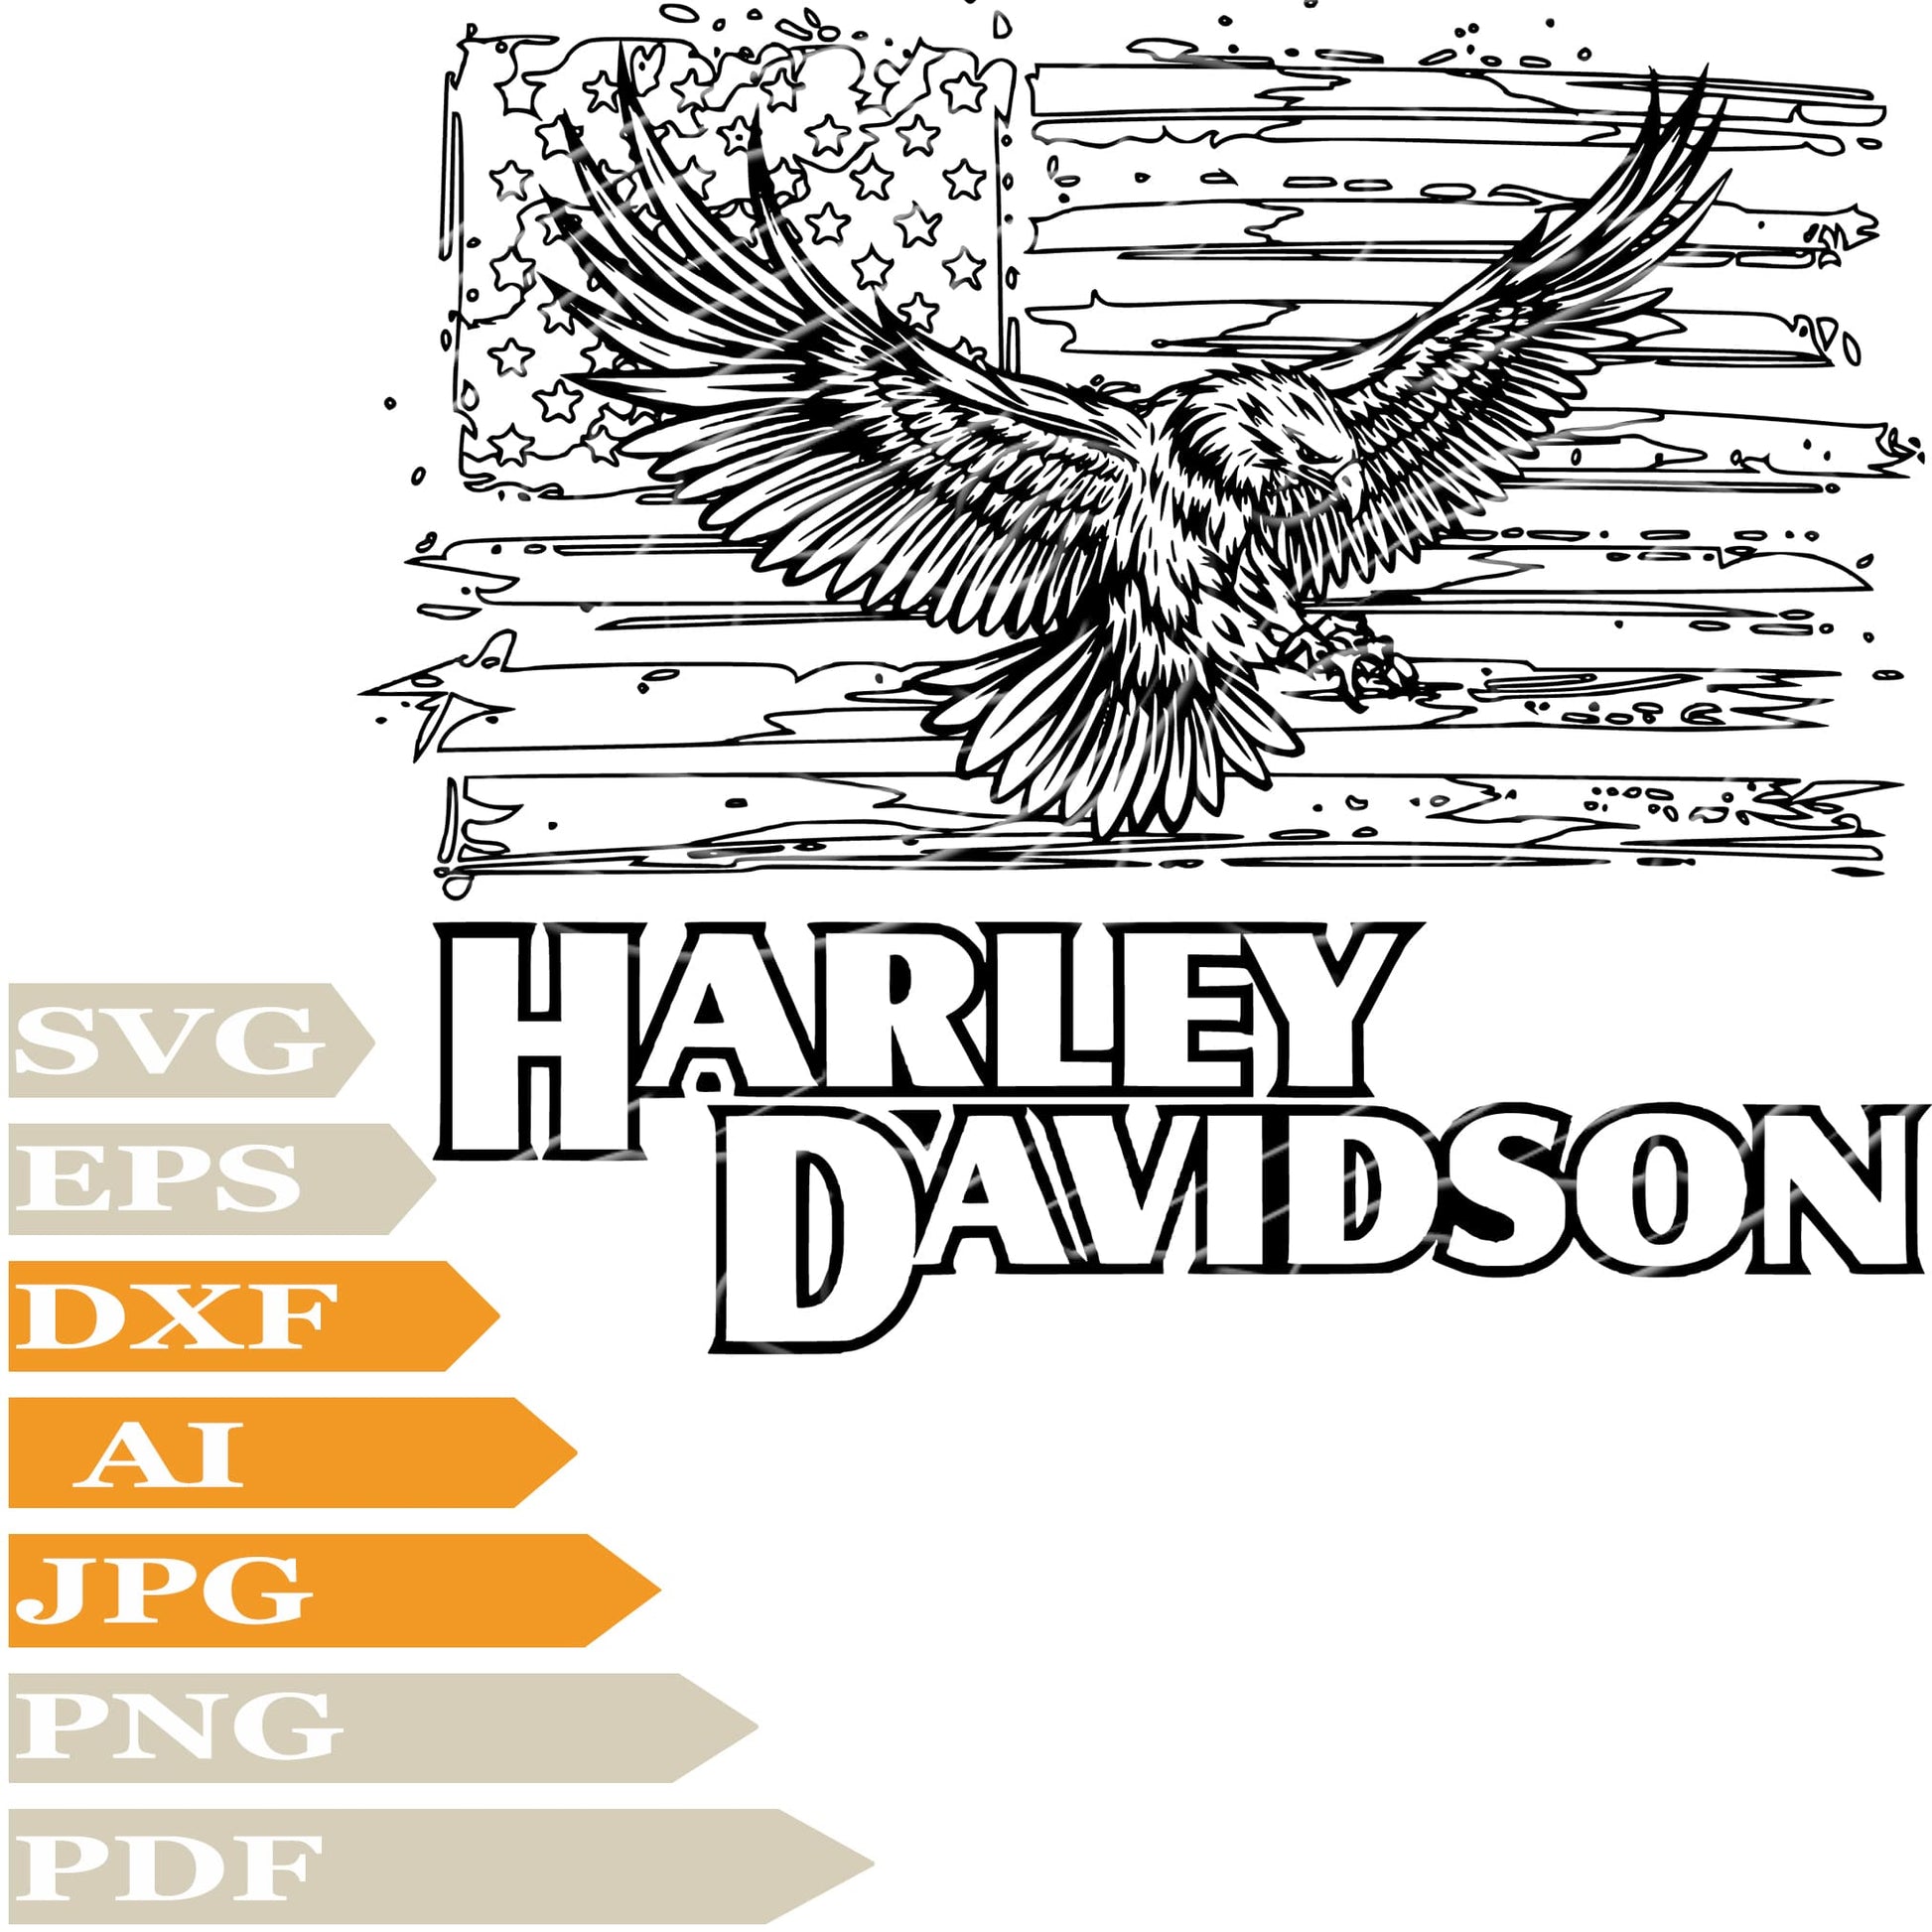 Eagle Usa Flag, Harley Davidson Svg File, Image Cut, Png, For Tattoo, Silhouette, Digital Vector Download, Cut File, Clipart, For Cricut